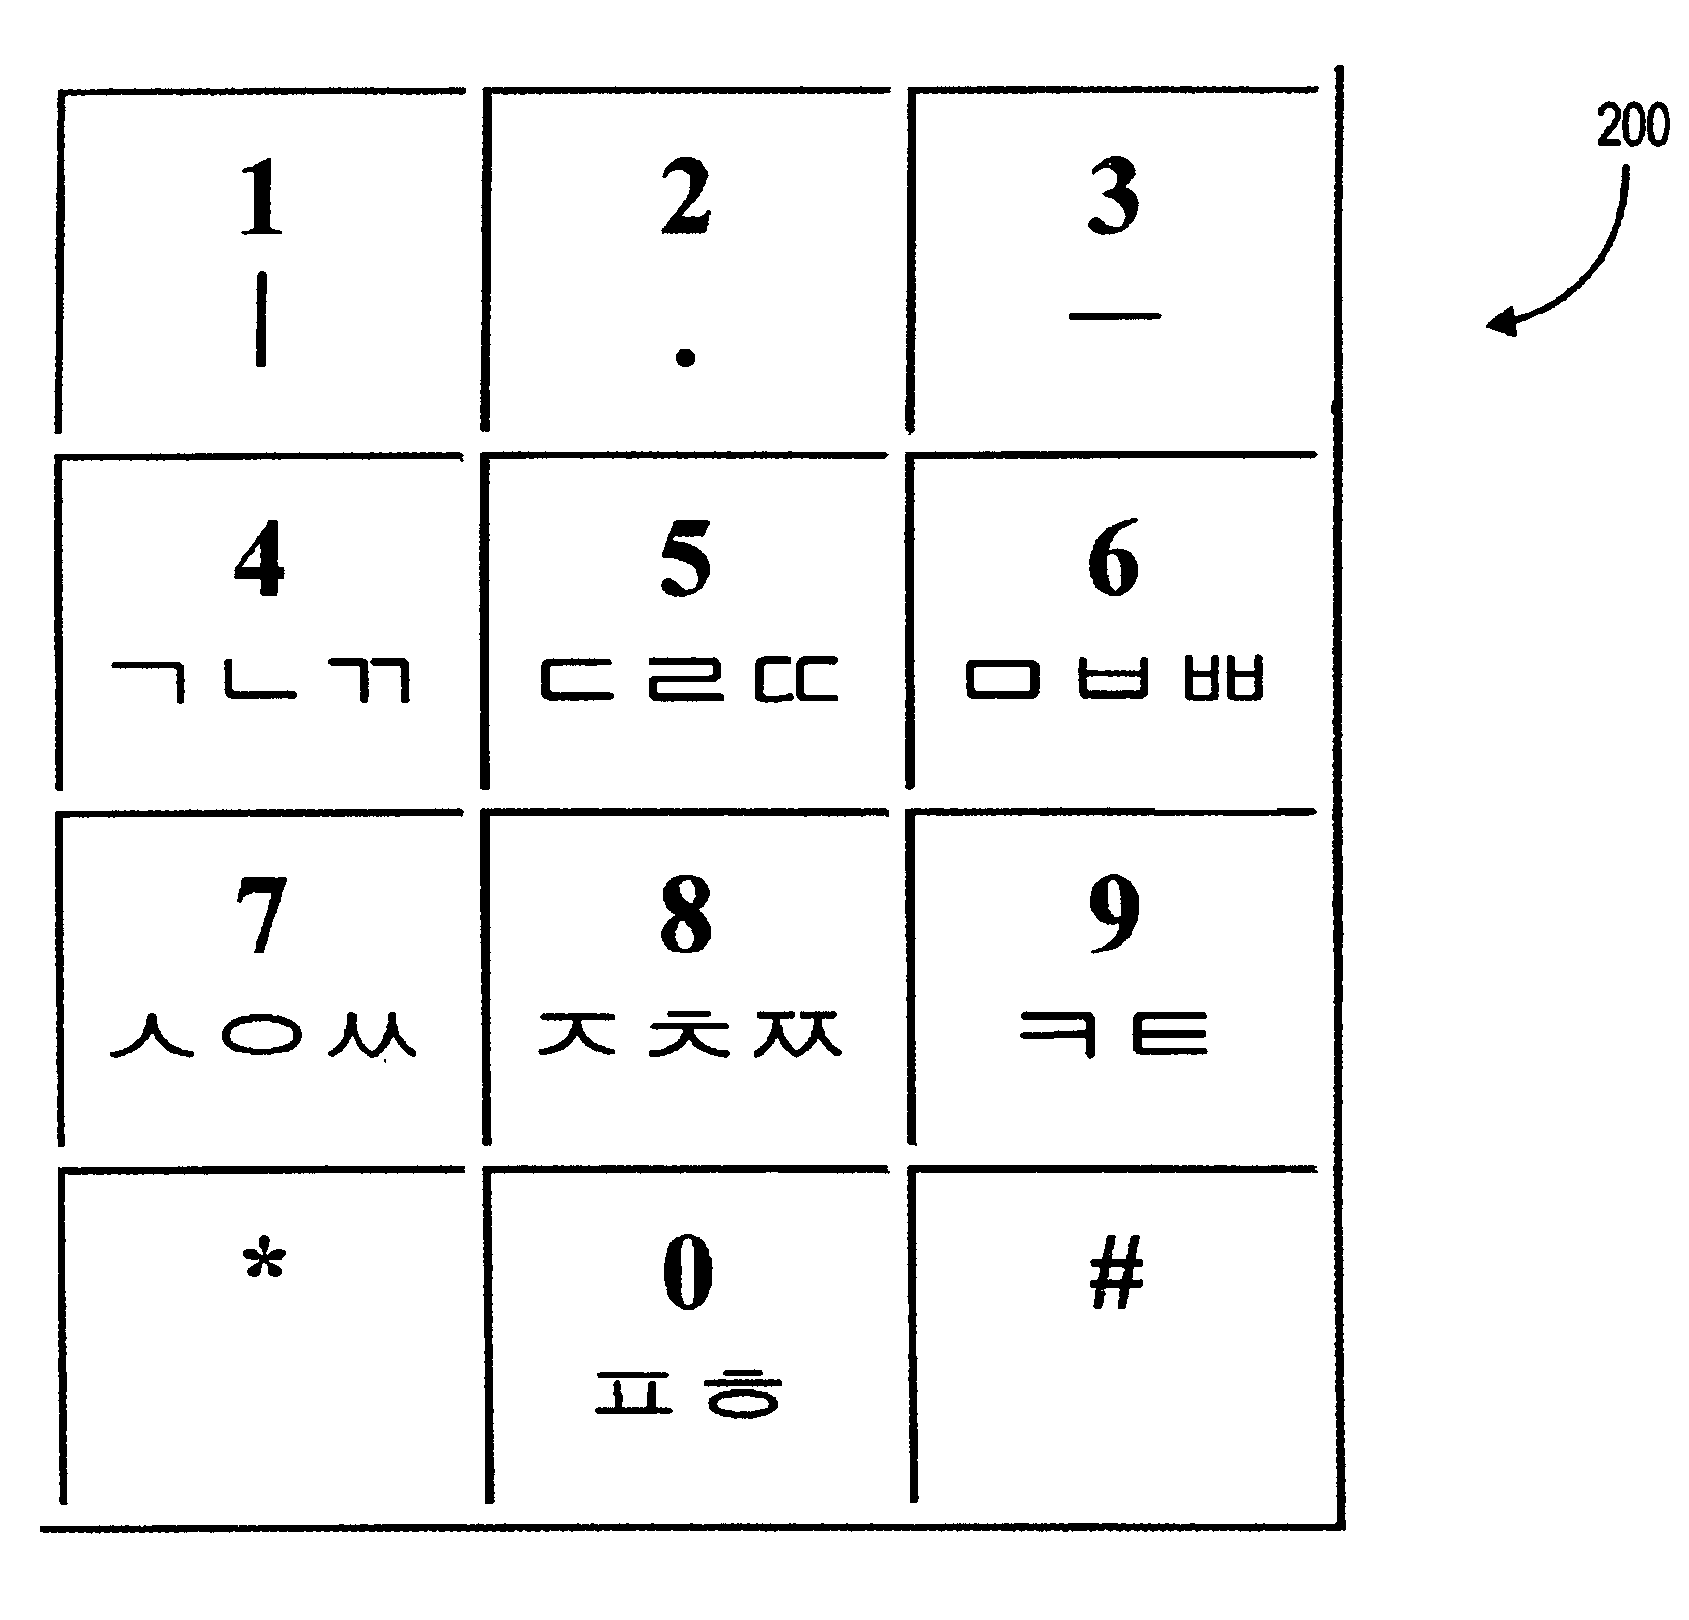 Korean language predictive mechanism for text entry by a user